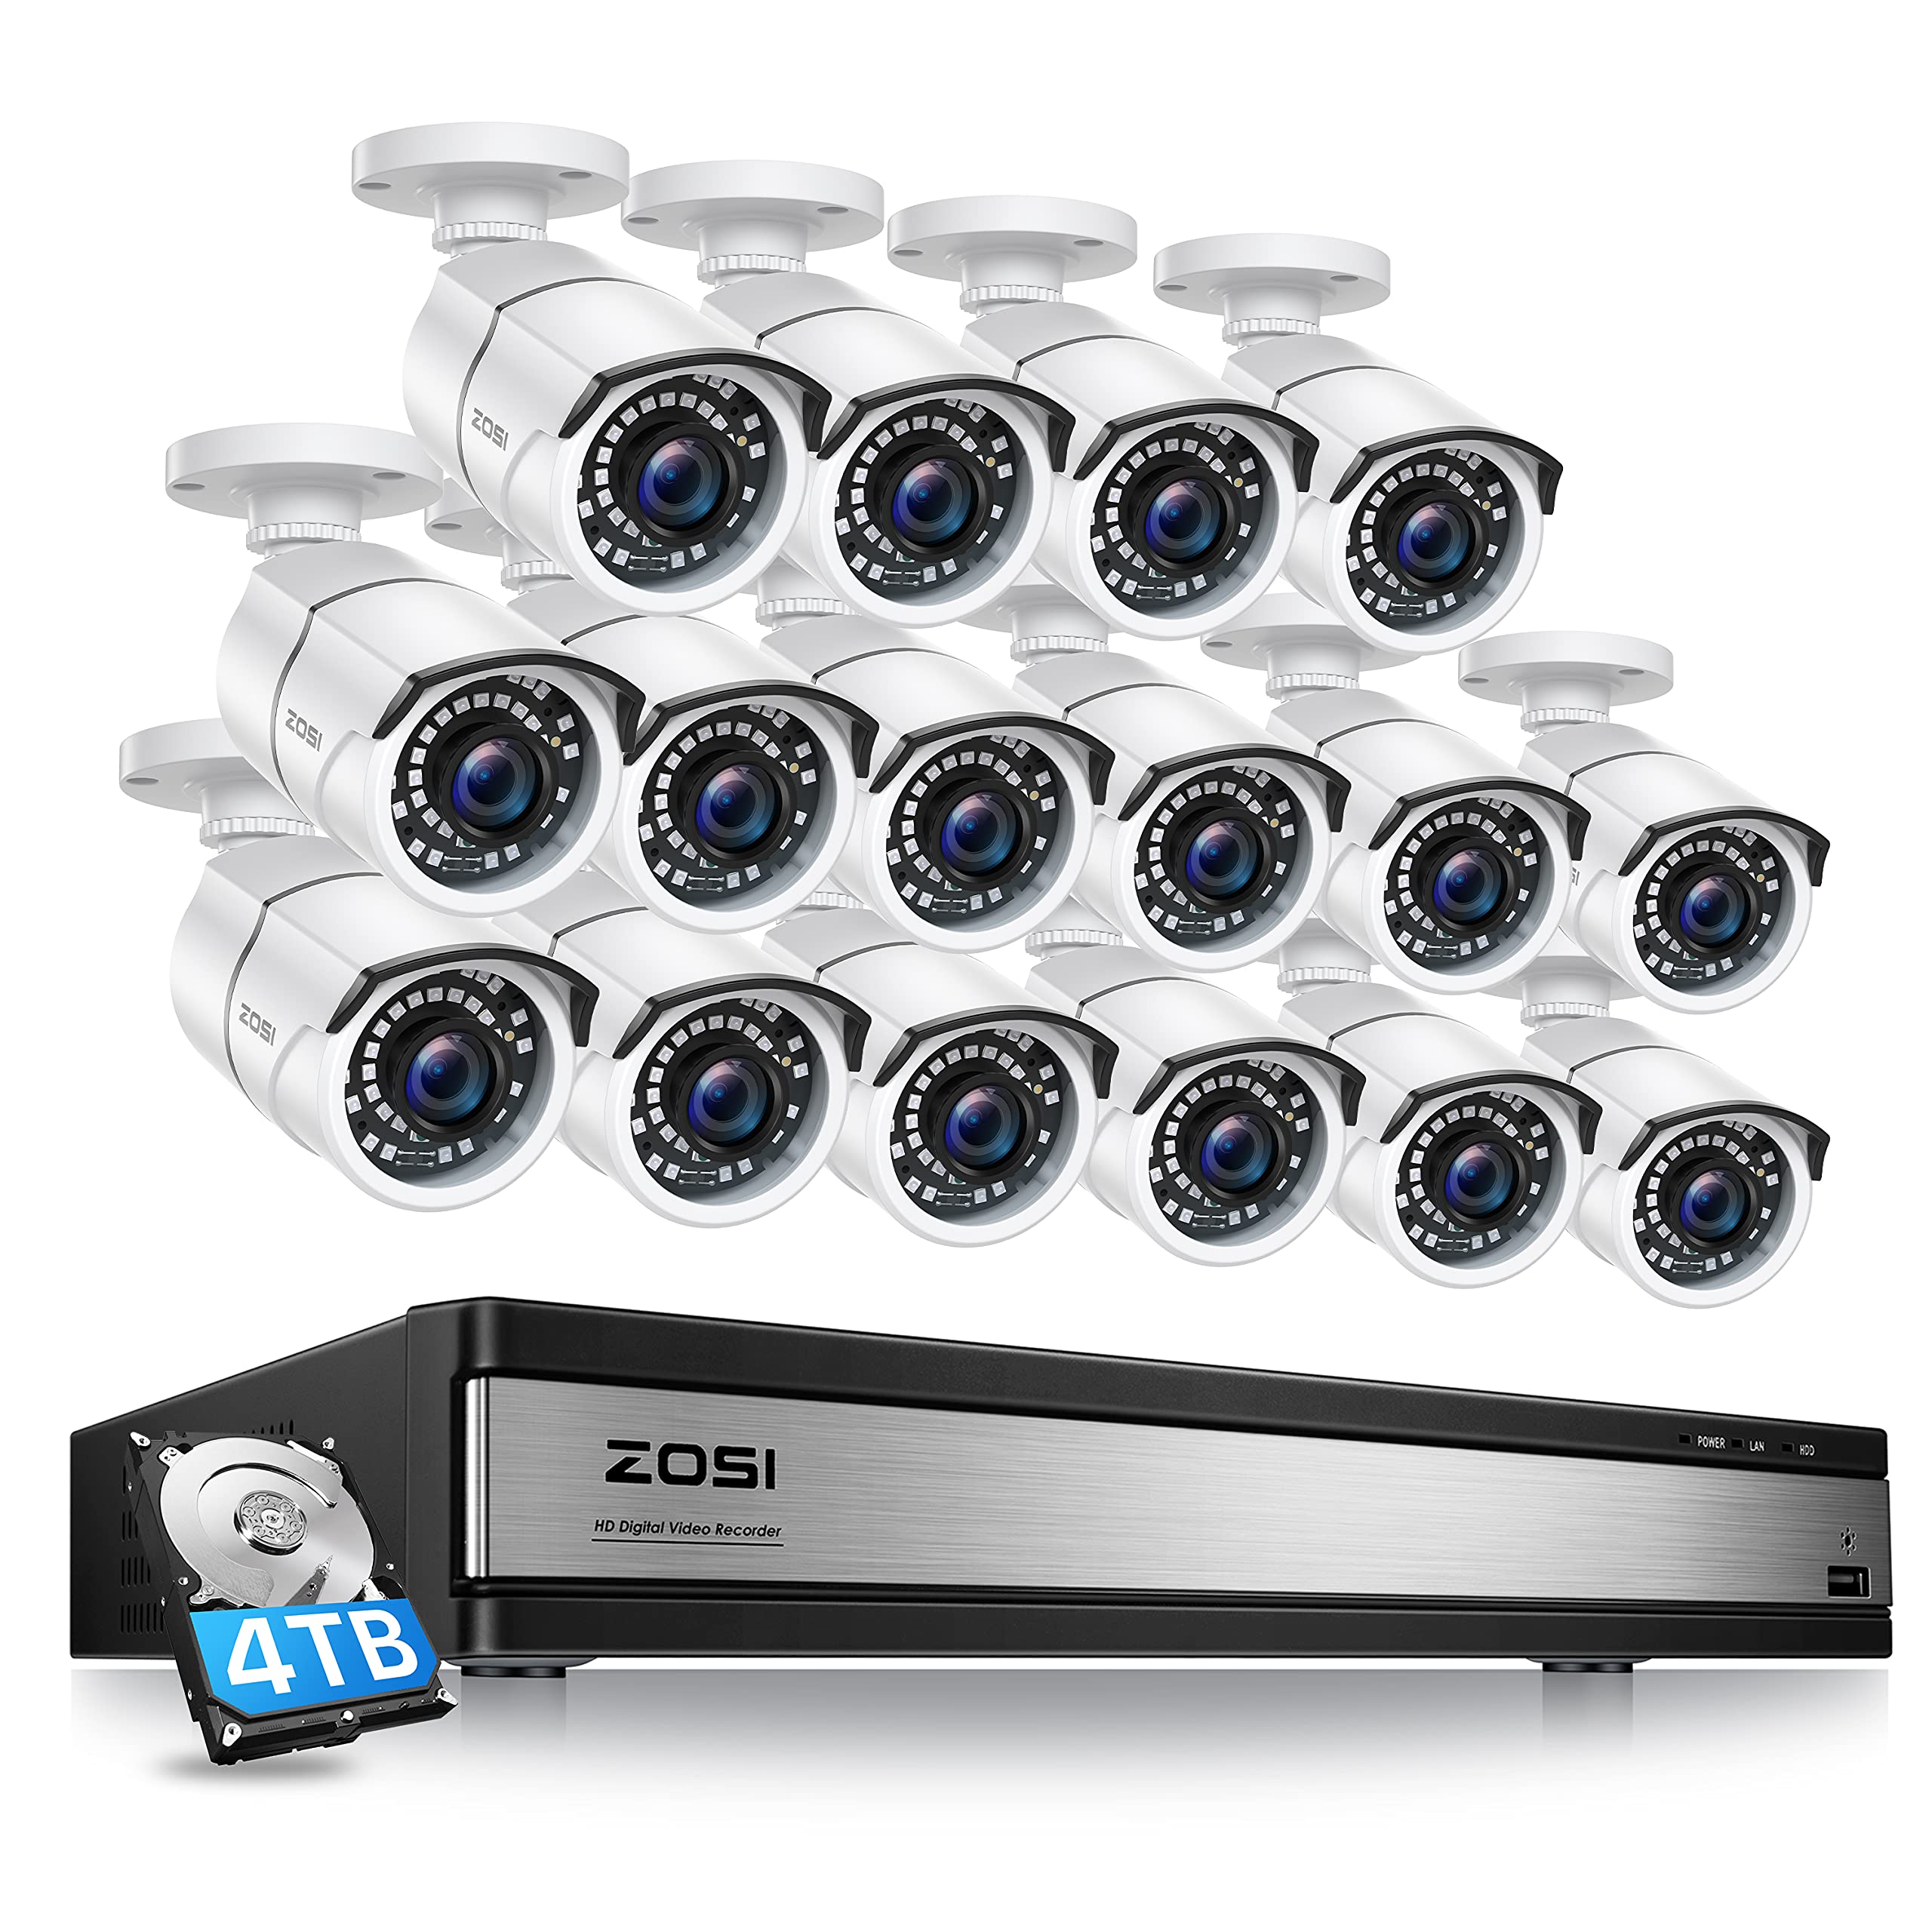 Amazon.com : ZOSI H.265+ 1080p 16 Channel Security Camera System ...